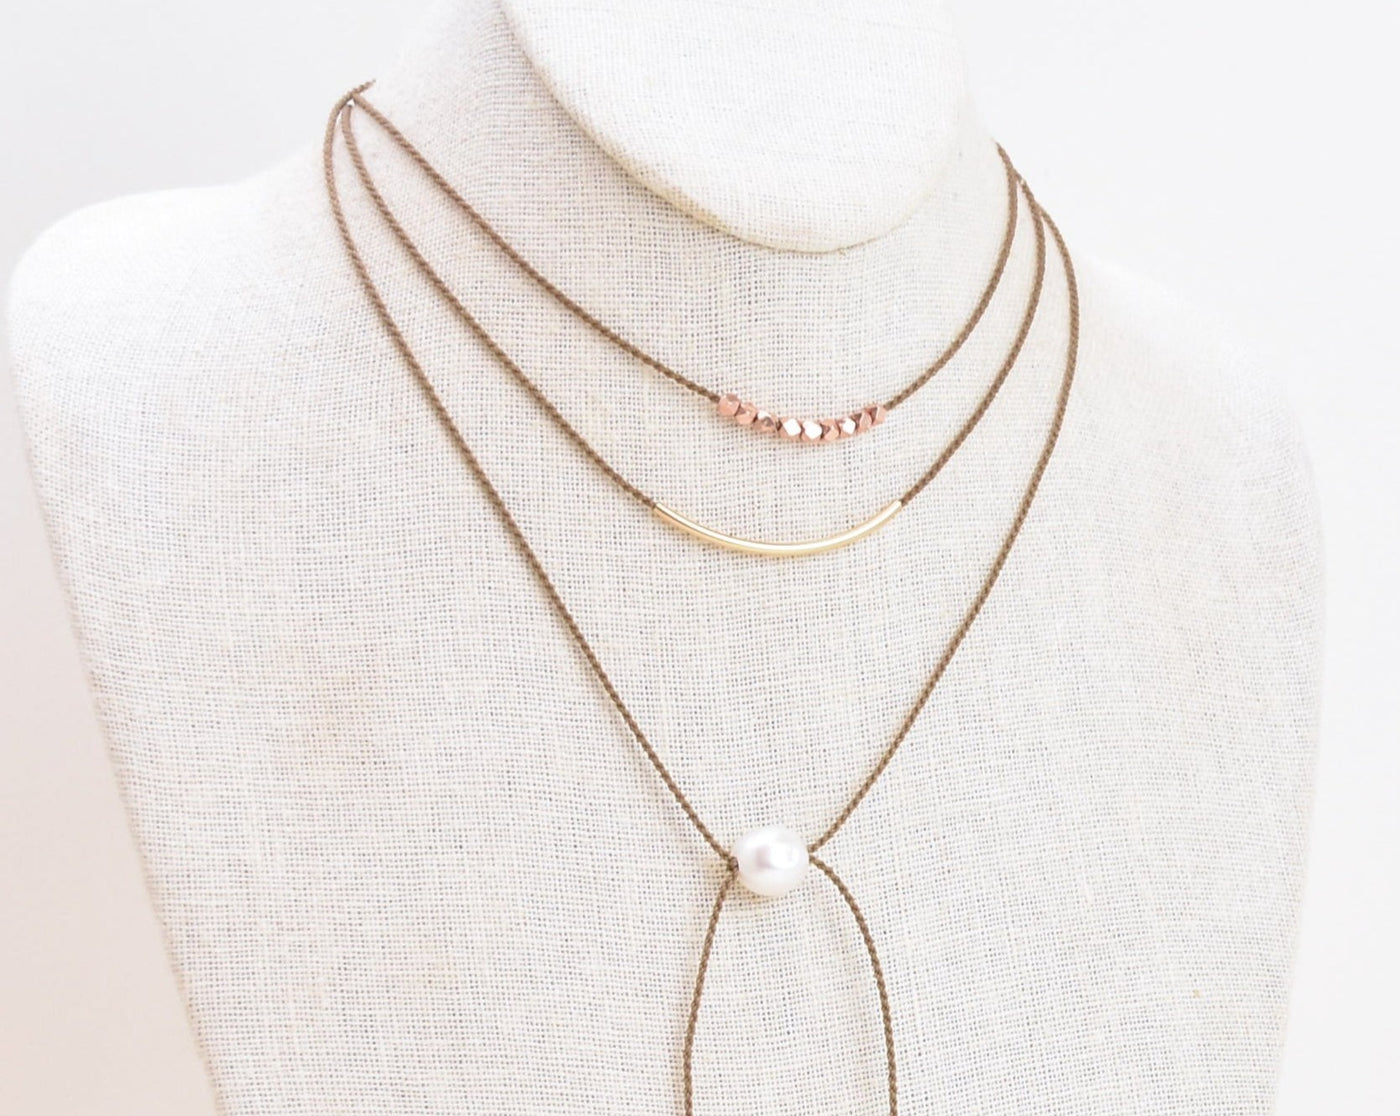 First Date - Necklace Stack